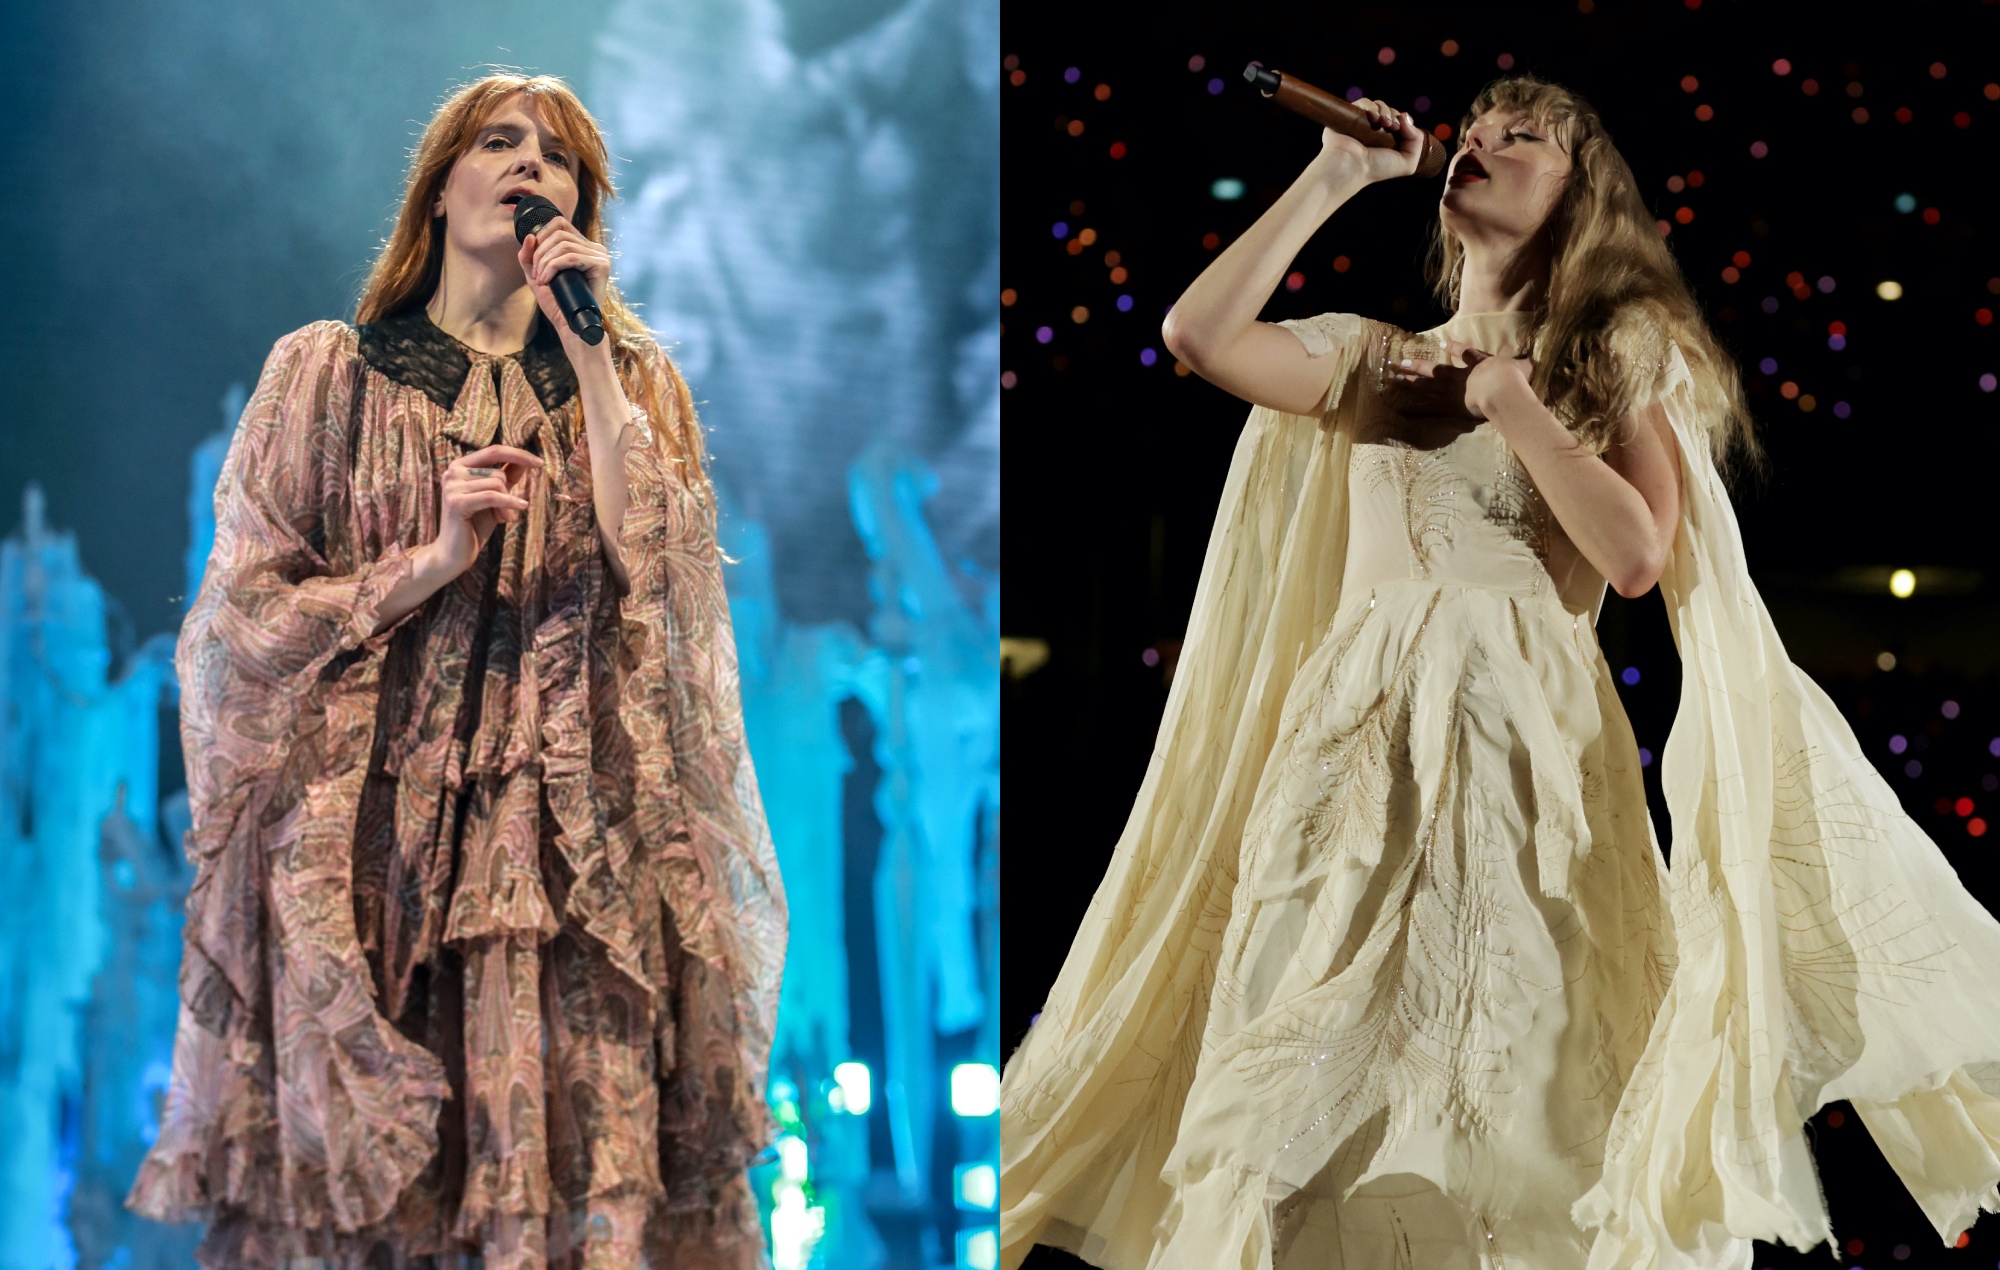 two side by side photographs of Florence Welch (left) and Taylor Swift (right) performing live on stage